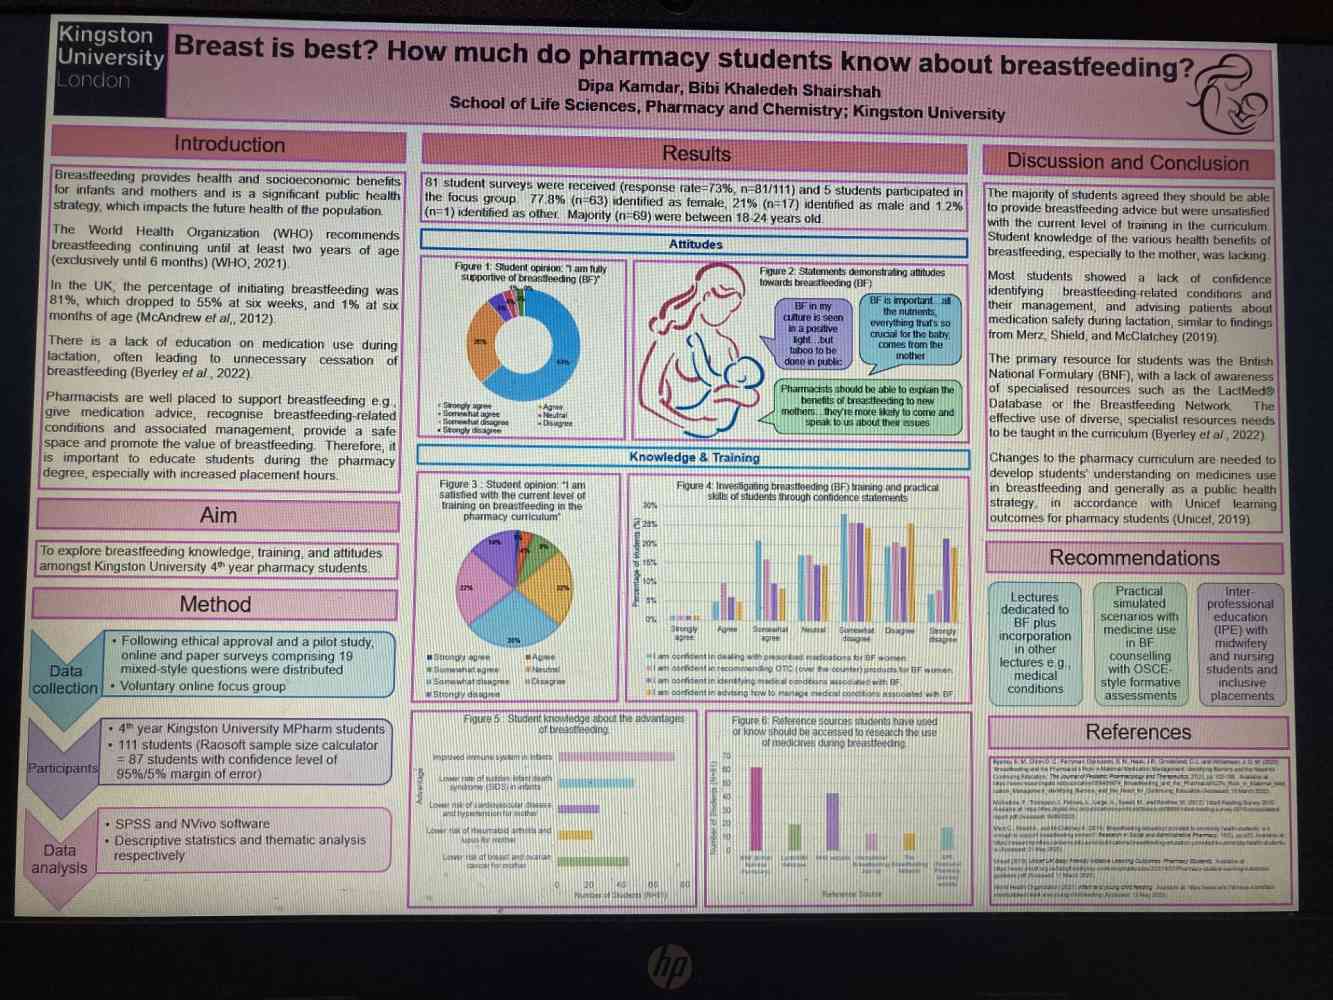 Poster Presentation at The Pharmacy Education Conference 2023 - Breastfeeding Knowledge, Training and Attitudes in MPharm Students - Exploring Breastfeeding Knowledge, Training and Attitudes in MPharm Students